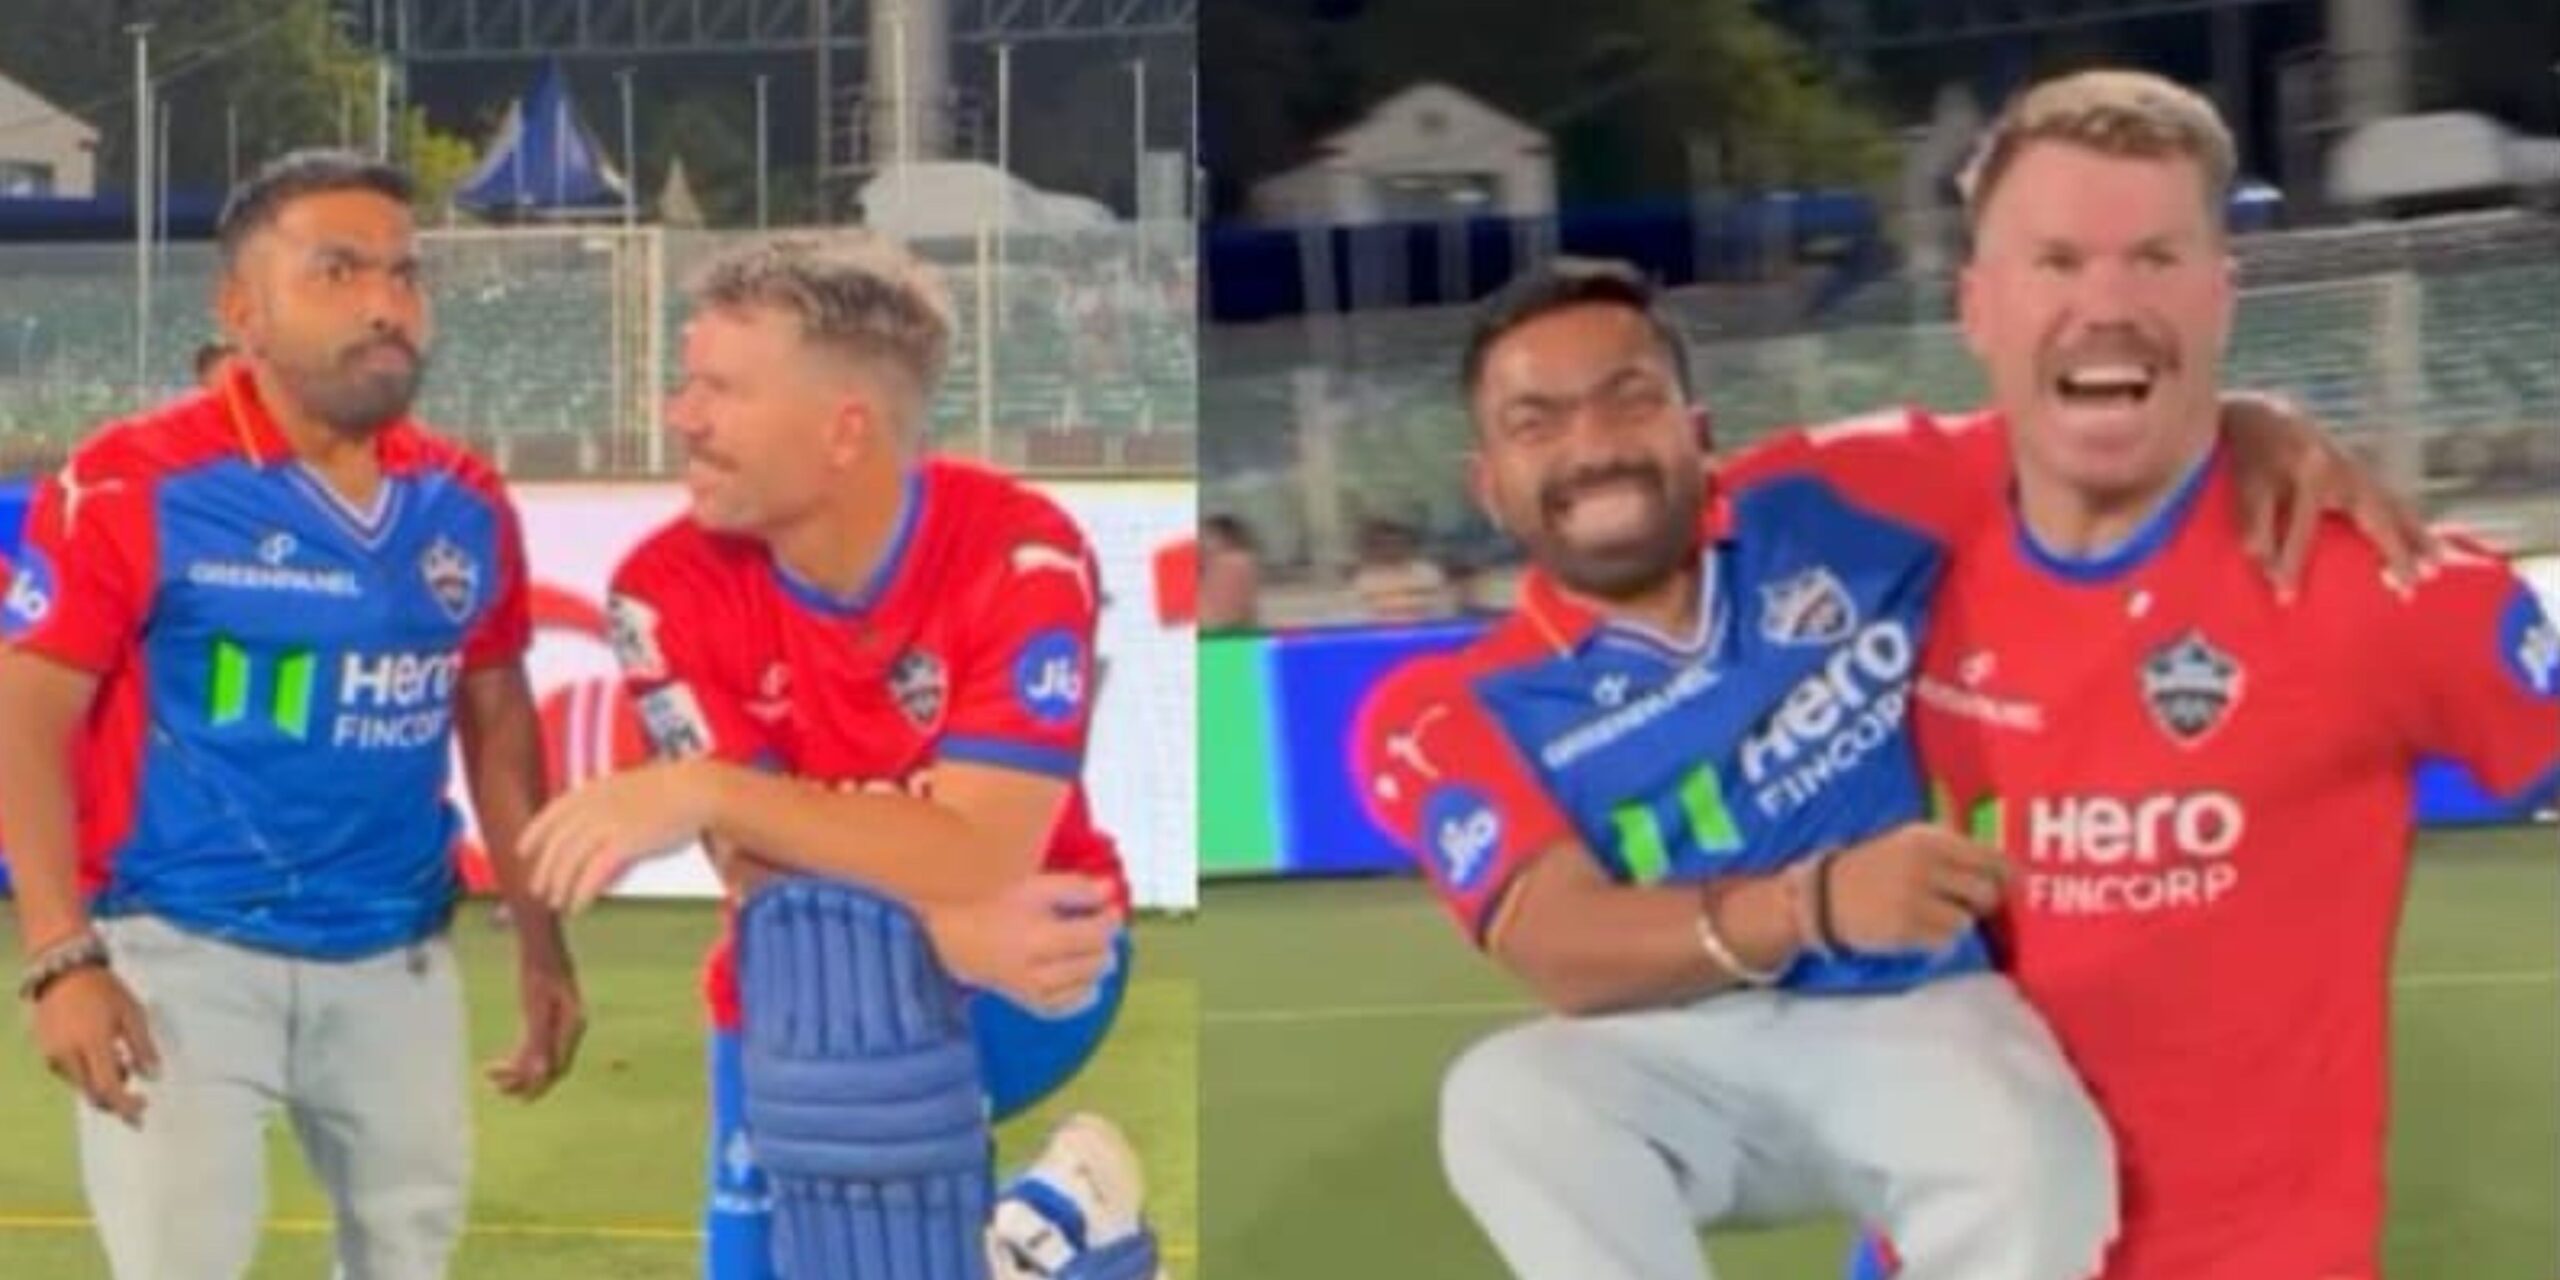 Fun video: David Warner rushes to get his Aadhar card prepared. Chalo Chalo Chalo